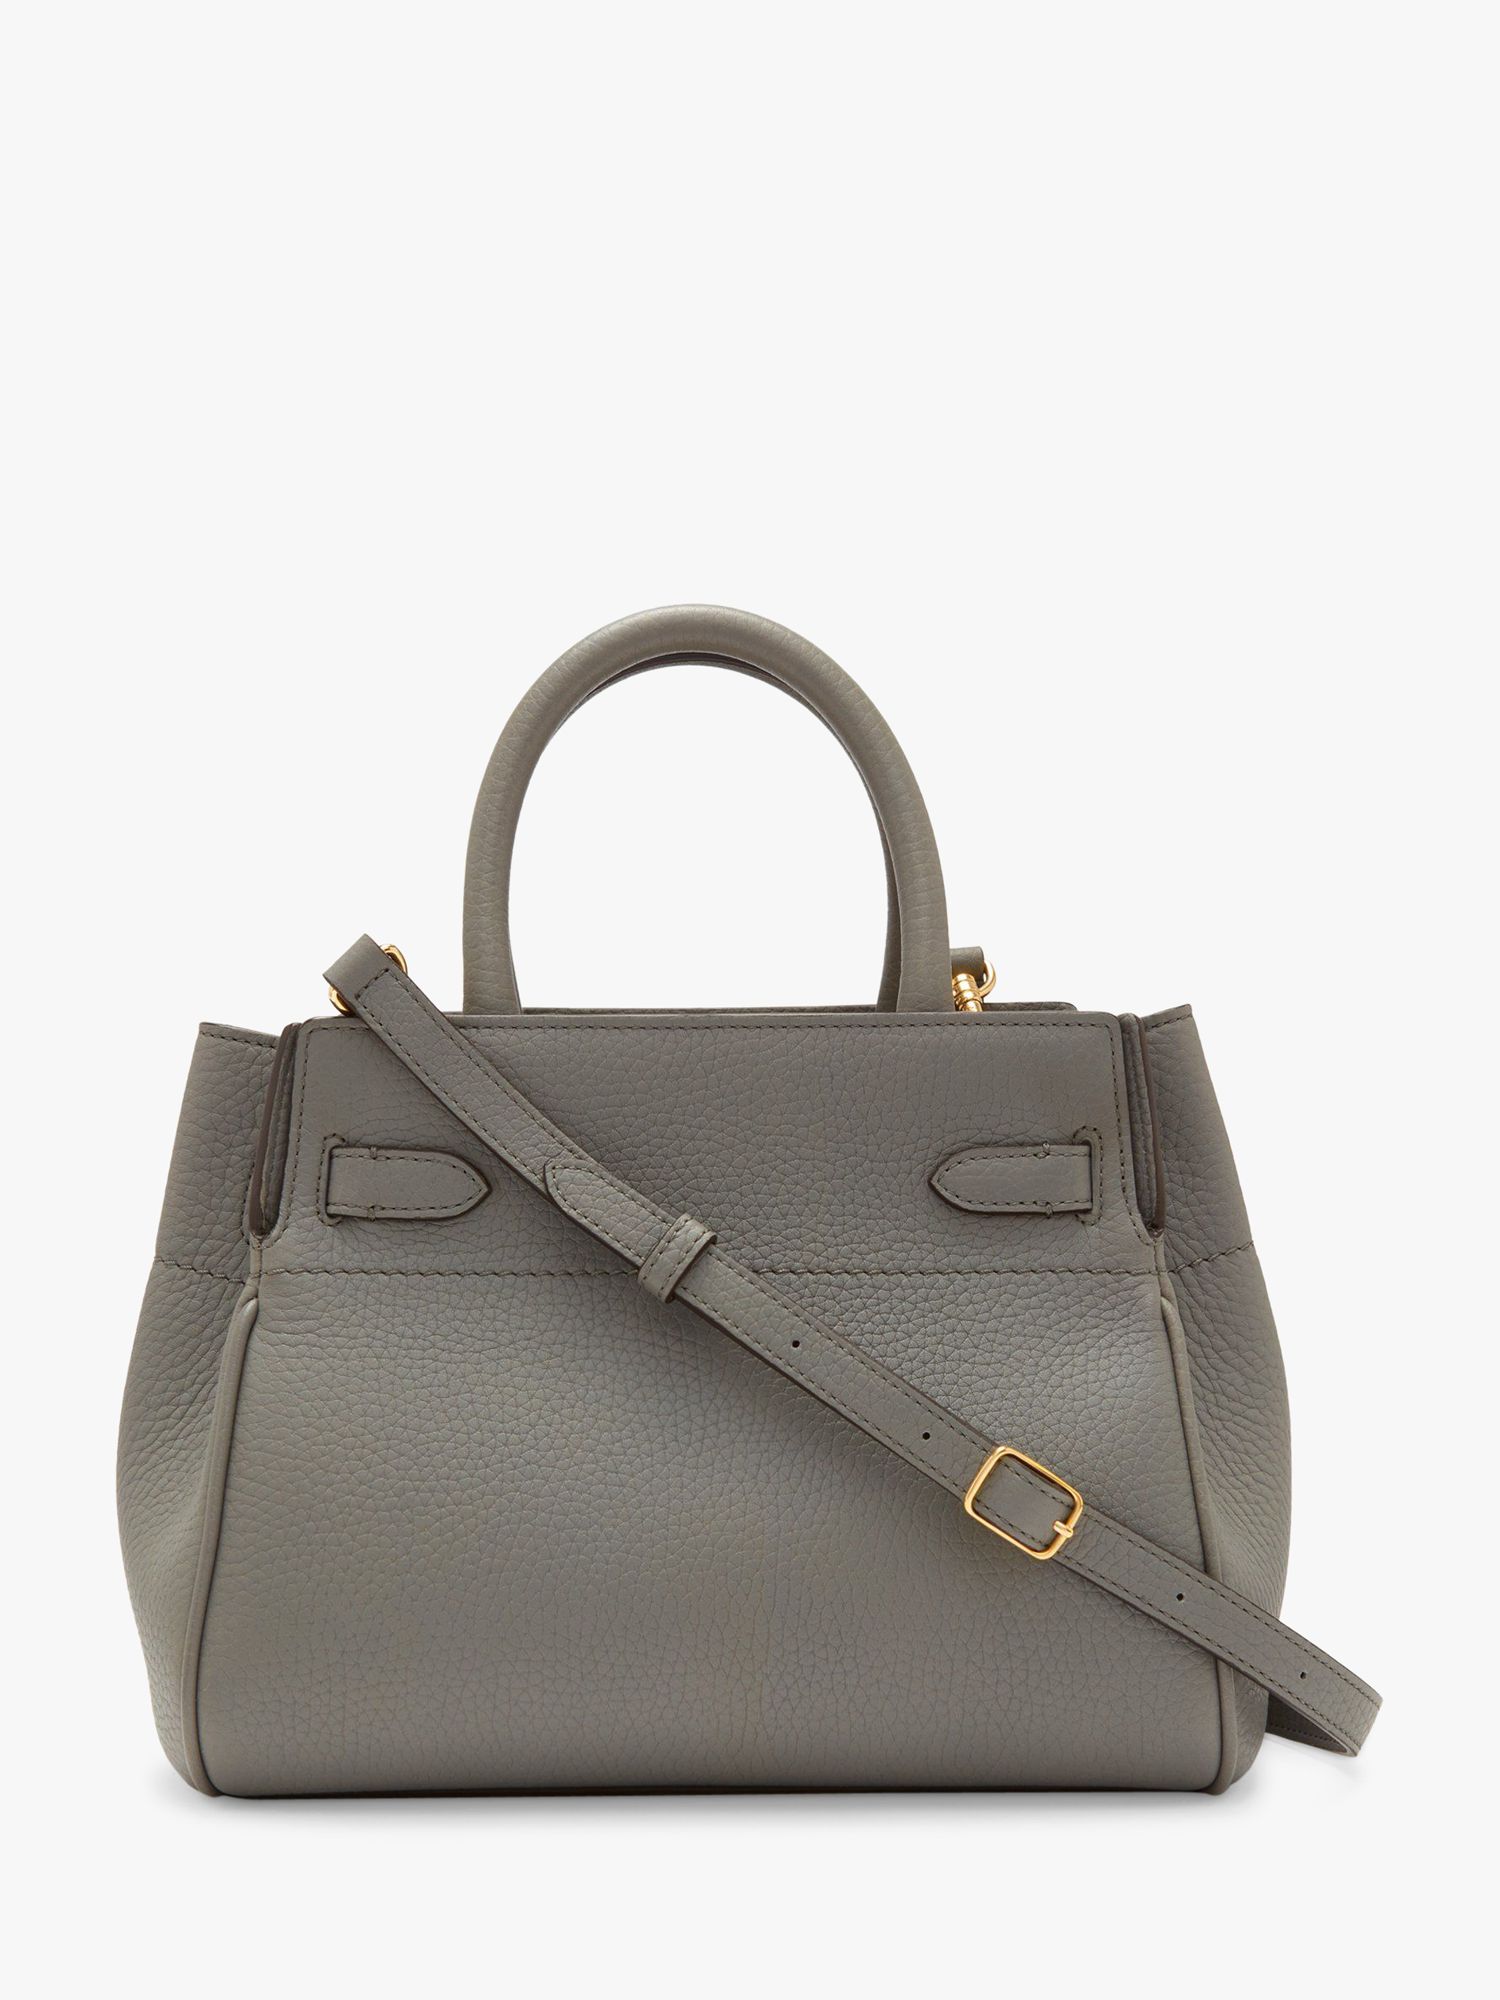 Mulberry Small Belted Bayswater Heavy Grain Leather Handbag, Charcoal ...